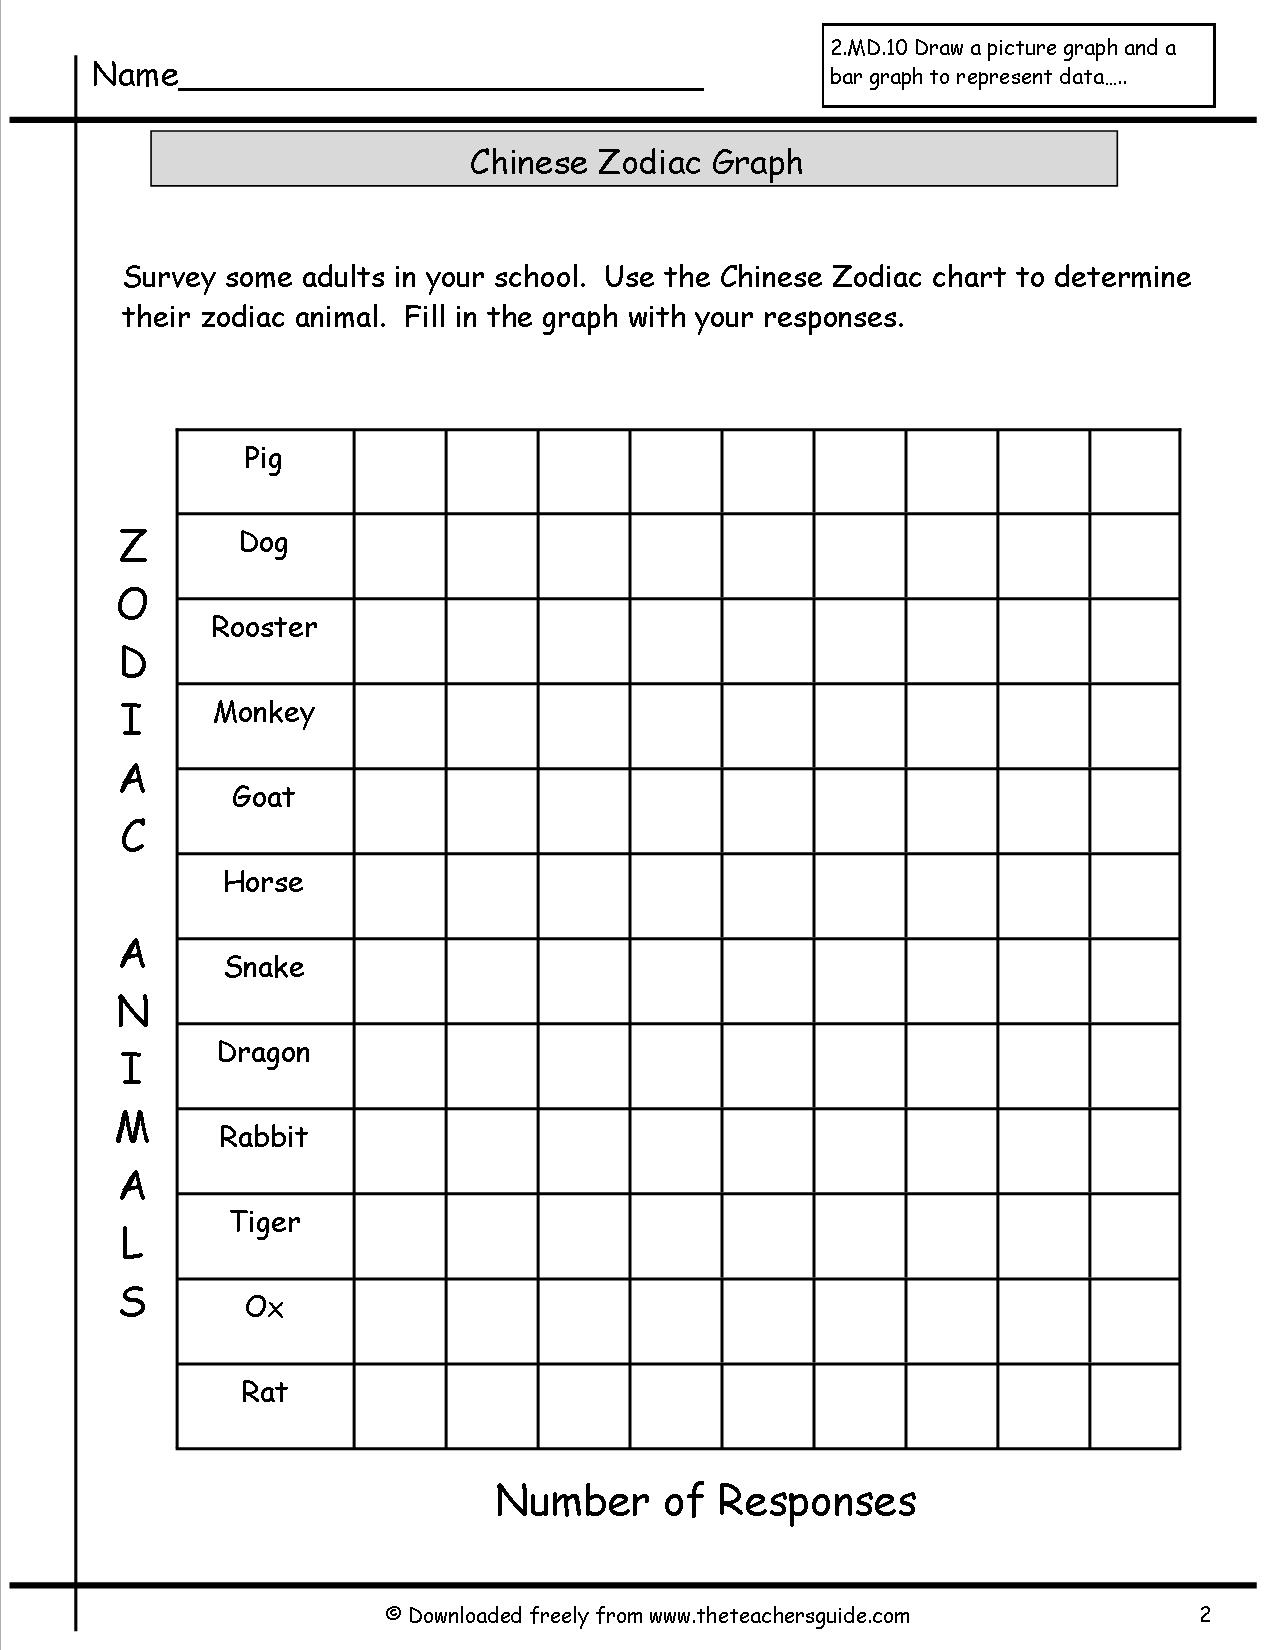 Reading And Creating Bar Graphs Worksheets From The Teacher s Guide Blank Bar Graph Printable